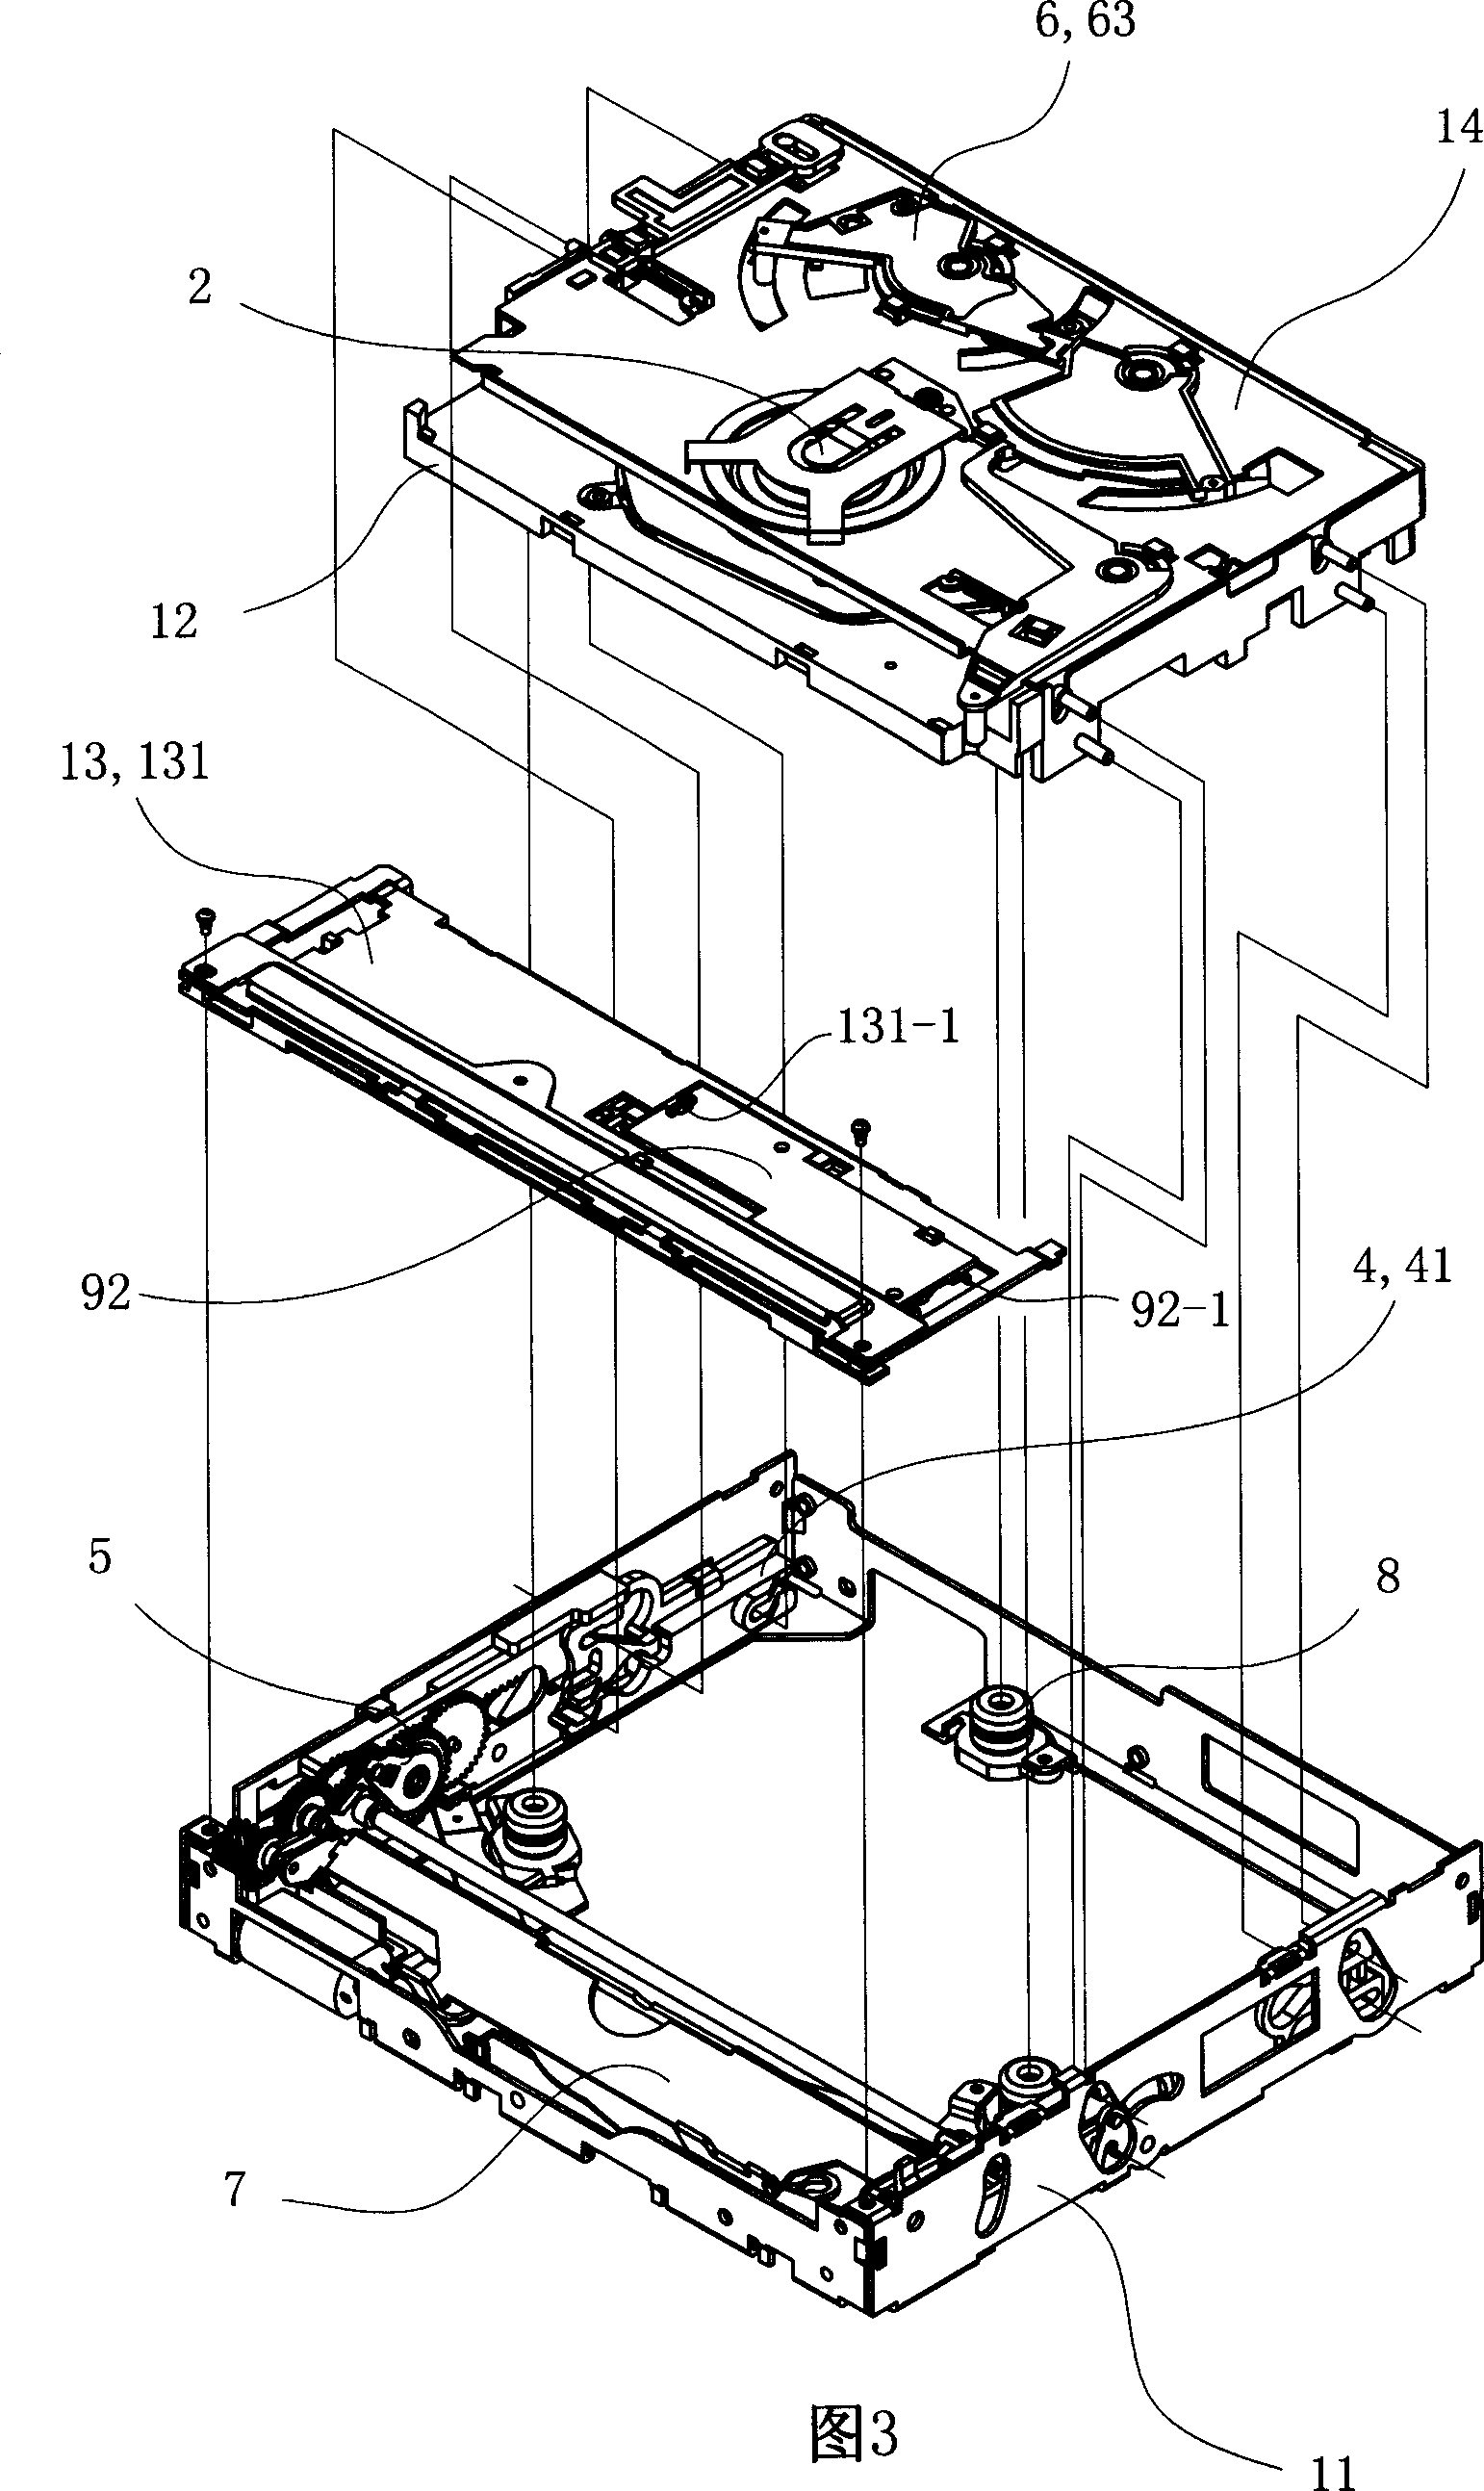 Suction disk loading device and core vibration abatement and core anti-vibration method